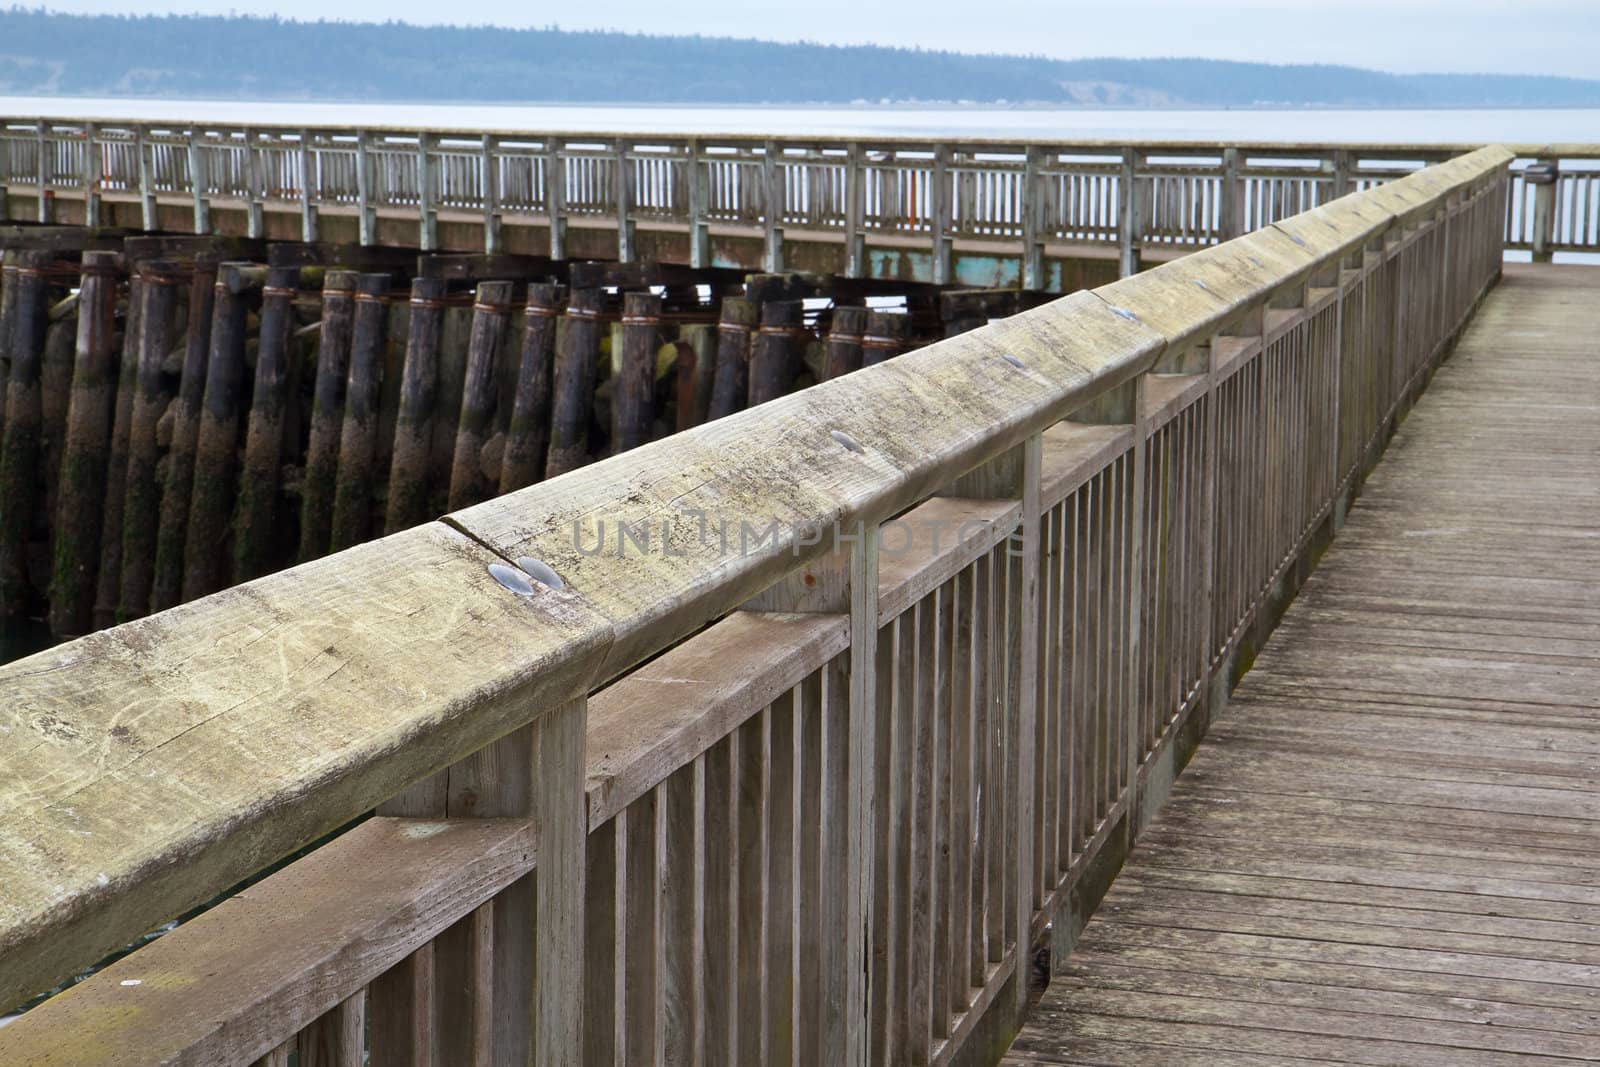  Angled Pier Boardwalk with soft focus background of overcast bay